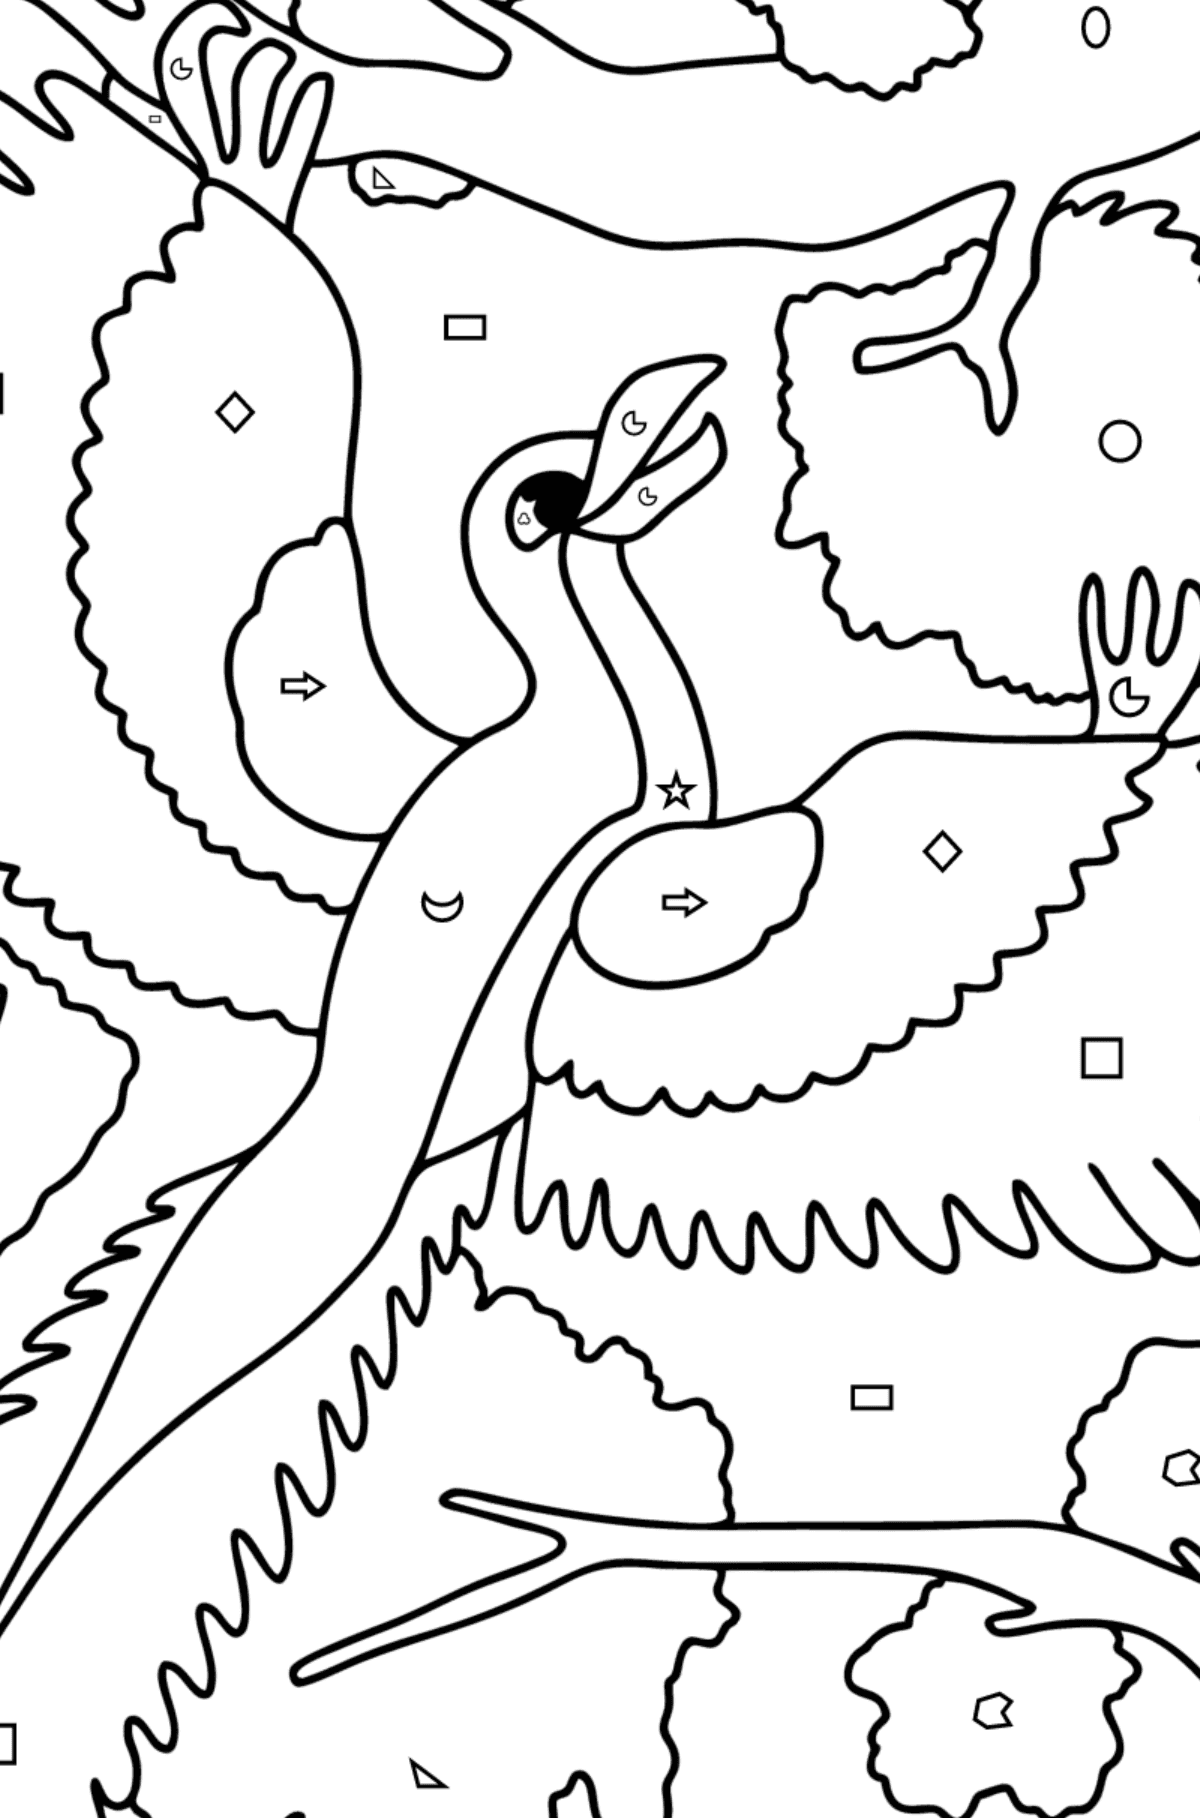 Archeopteryx coloring page - Coloring by Geometric Shapes for Kids